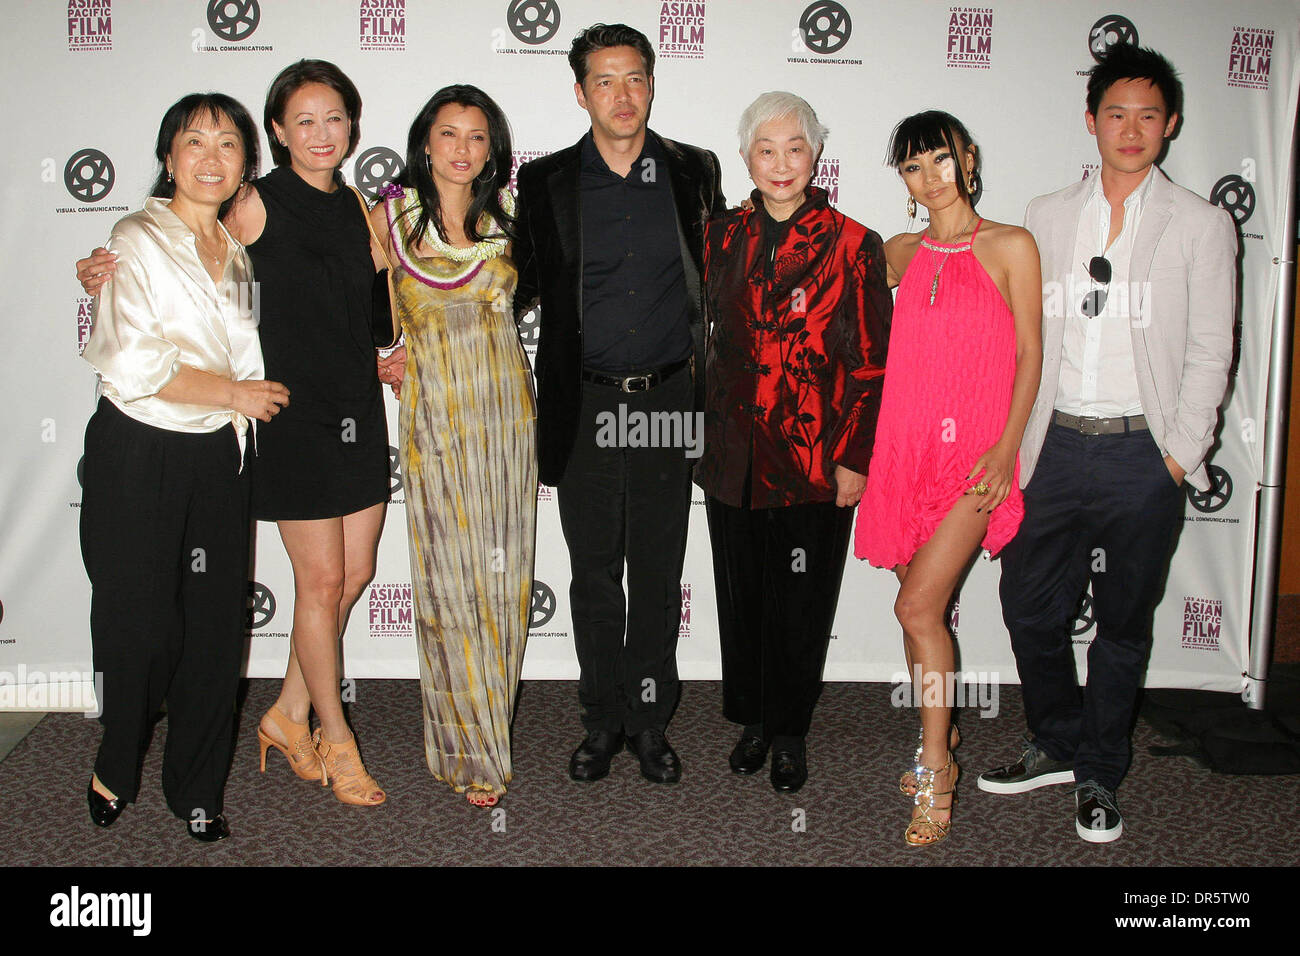 I14211CHW.Los Angeles Asian Pacific Film Festival Presents ''Dim Sum Funeral'' Special Screening .Directors Guild Of America, Los Angeles, California 05-02-2009.DIM SUM FUNERAL CAST-L-R-ANNA CHI-DIRECTOR, JULIA NICKSON,KELLY HU, RUSSELL WONG ,LISA LU, BAI LING AND  CURTIS LUM.Photo: Clinton H. Wallace-Photomundo-Globe Photos Inc Â©2009 (Credit Image: © Clinton Wallace/Globe Photos/ Stock Photo